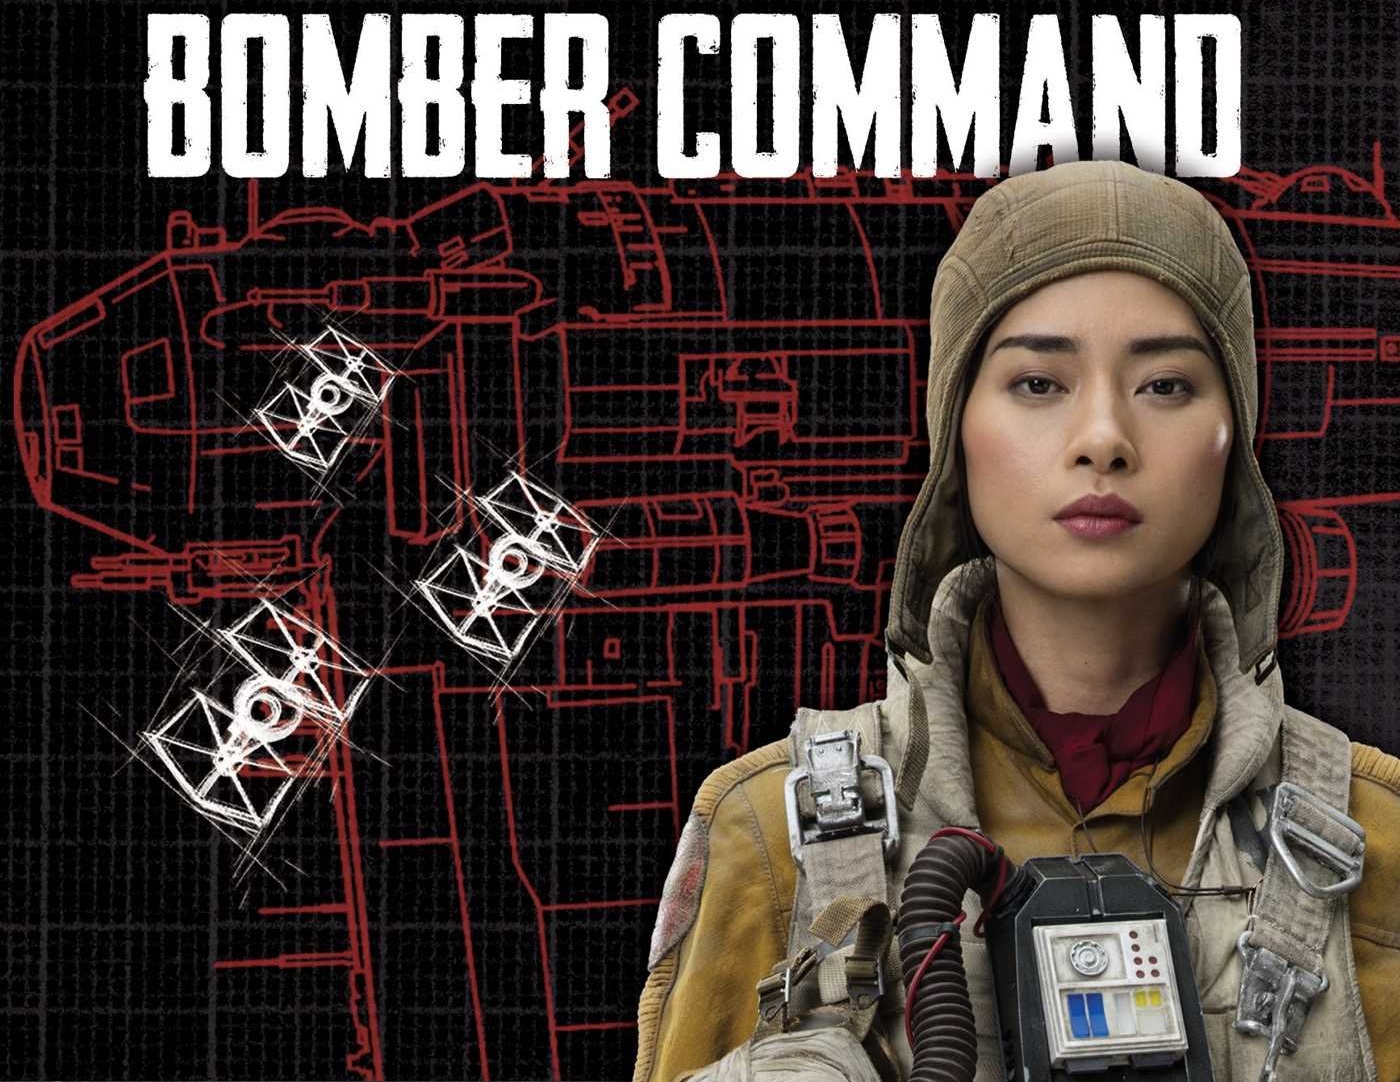 Cover for Star Wars VIII The Last Jedi: Bomber Command, by Jason Fry, featuring Paige Tico on the cover